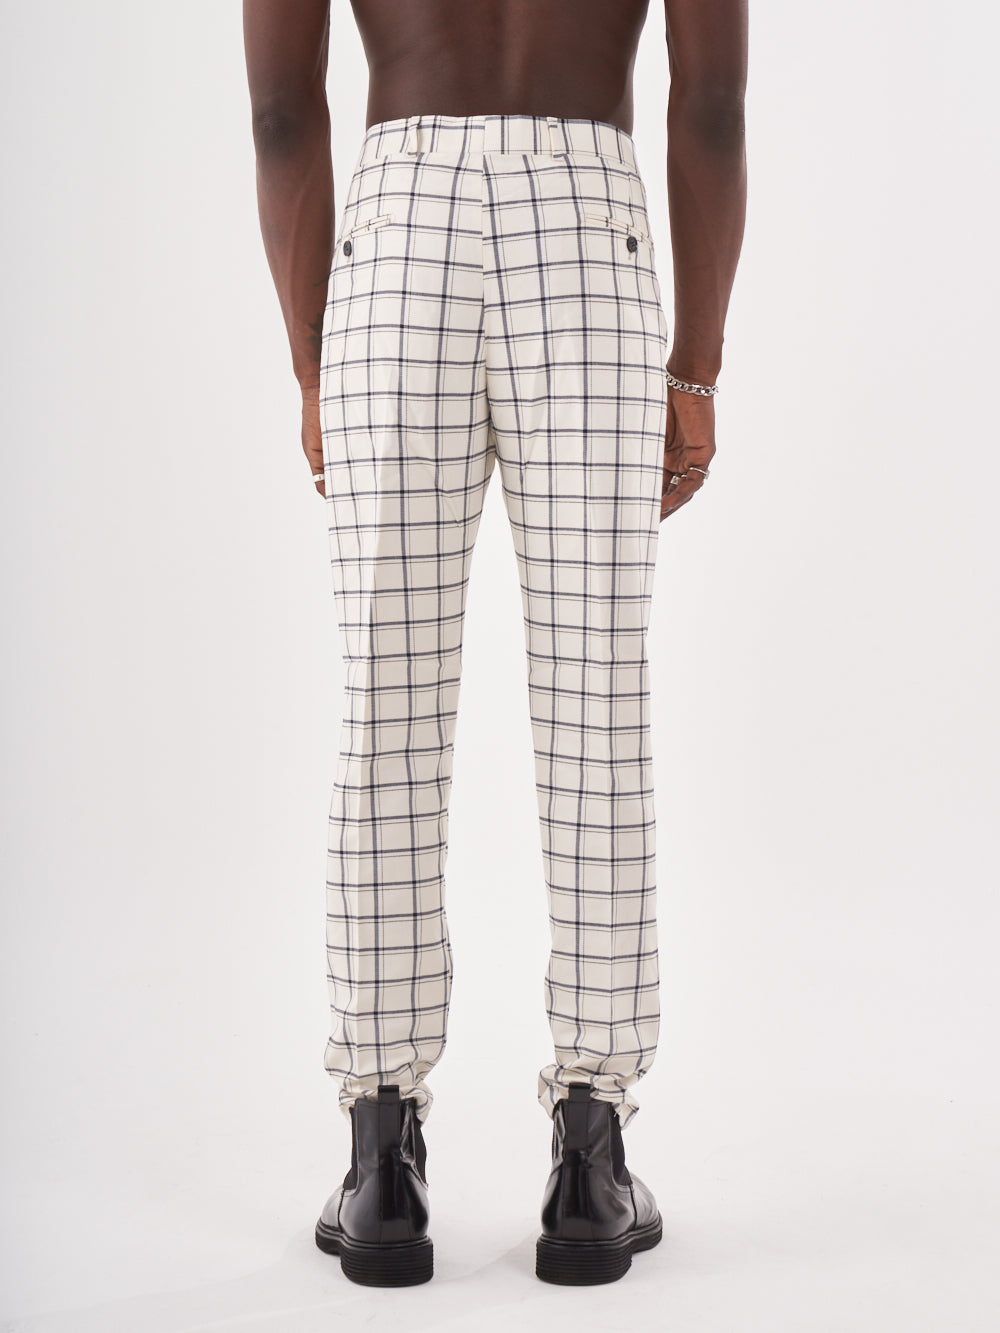 The back view of a man wearing TIMONO pants, a white and black checkered jogger pants.